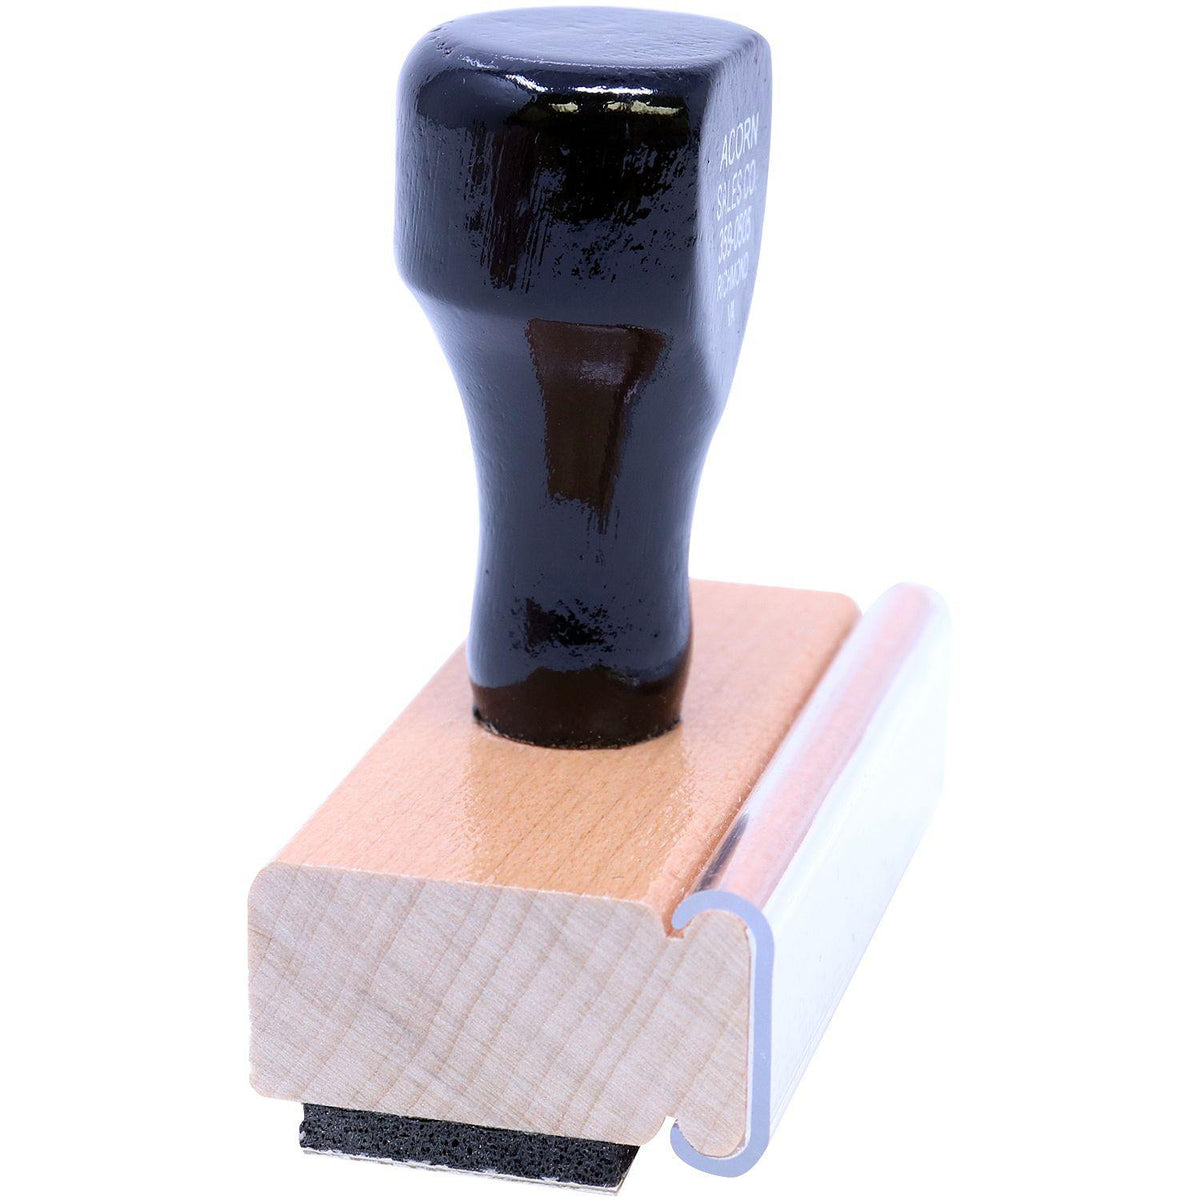 Side View of Covid-19 Rubber Stamp at an Angle